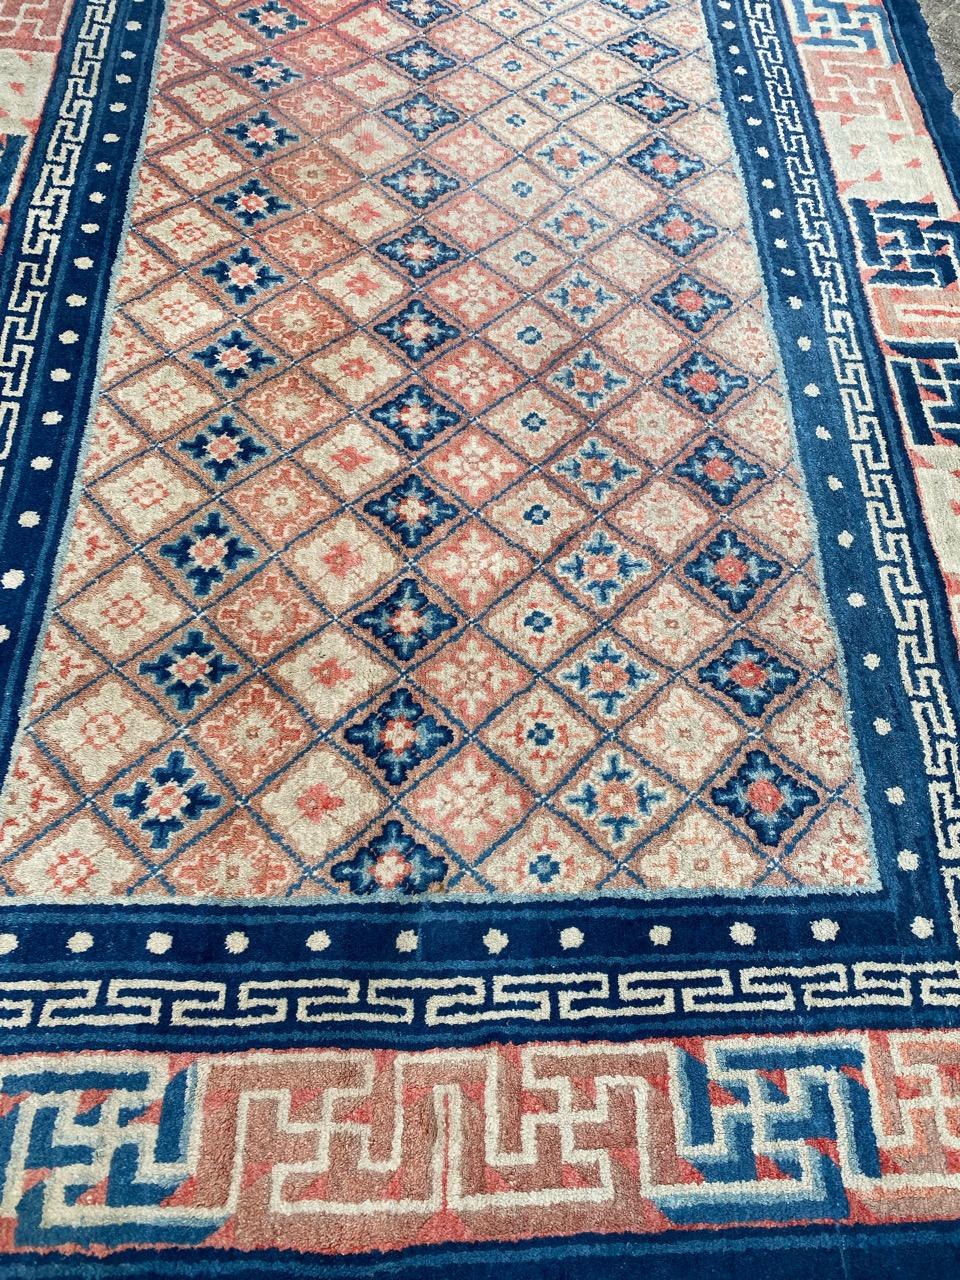 Exquisite antique Chinese rug from Ningxia. Stunning geometrical design featuring small diamond-shaped motifs with stylized floral patterns in a palette of blue, pink, orange, and white. The border showcases a pink background with overlapping line